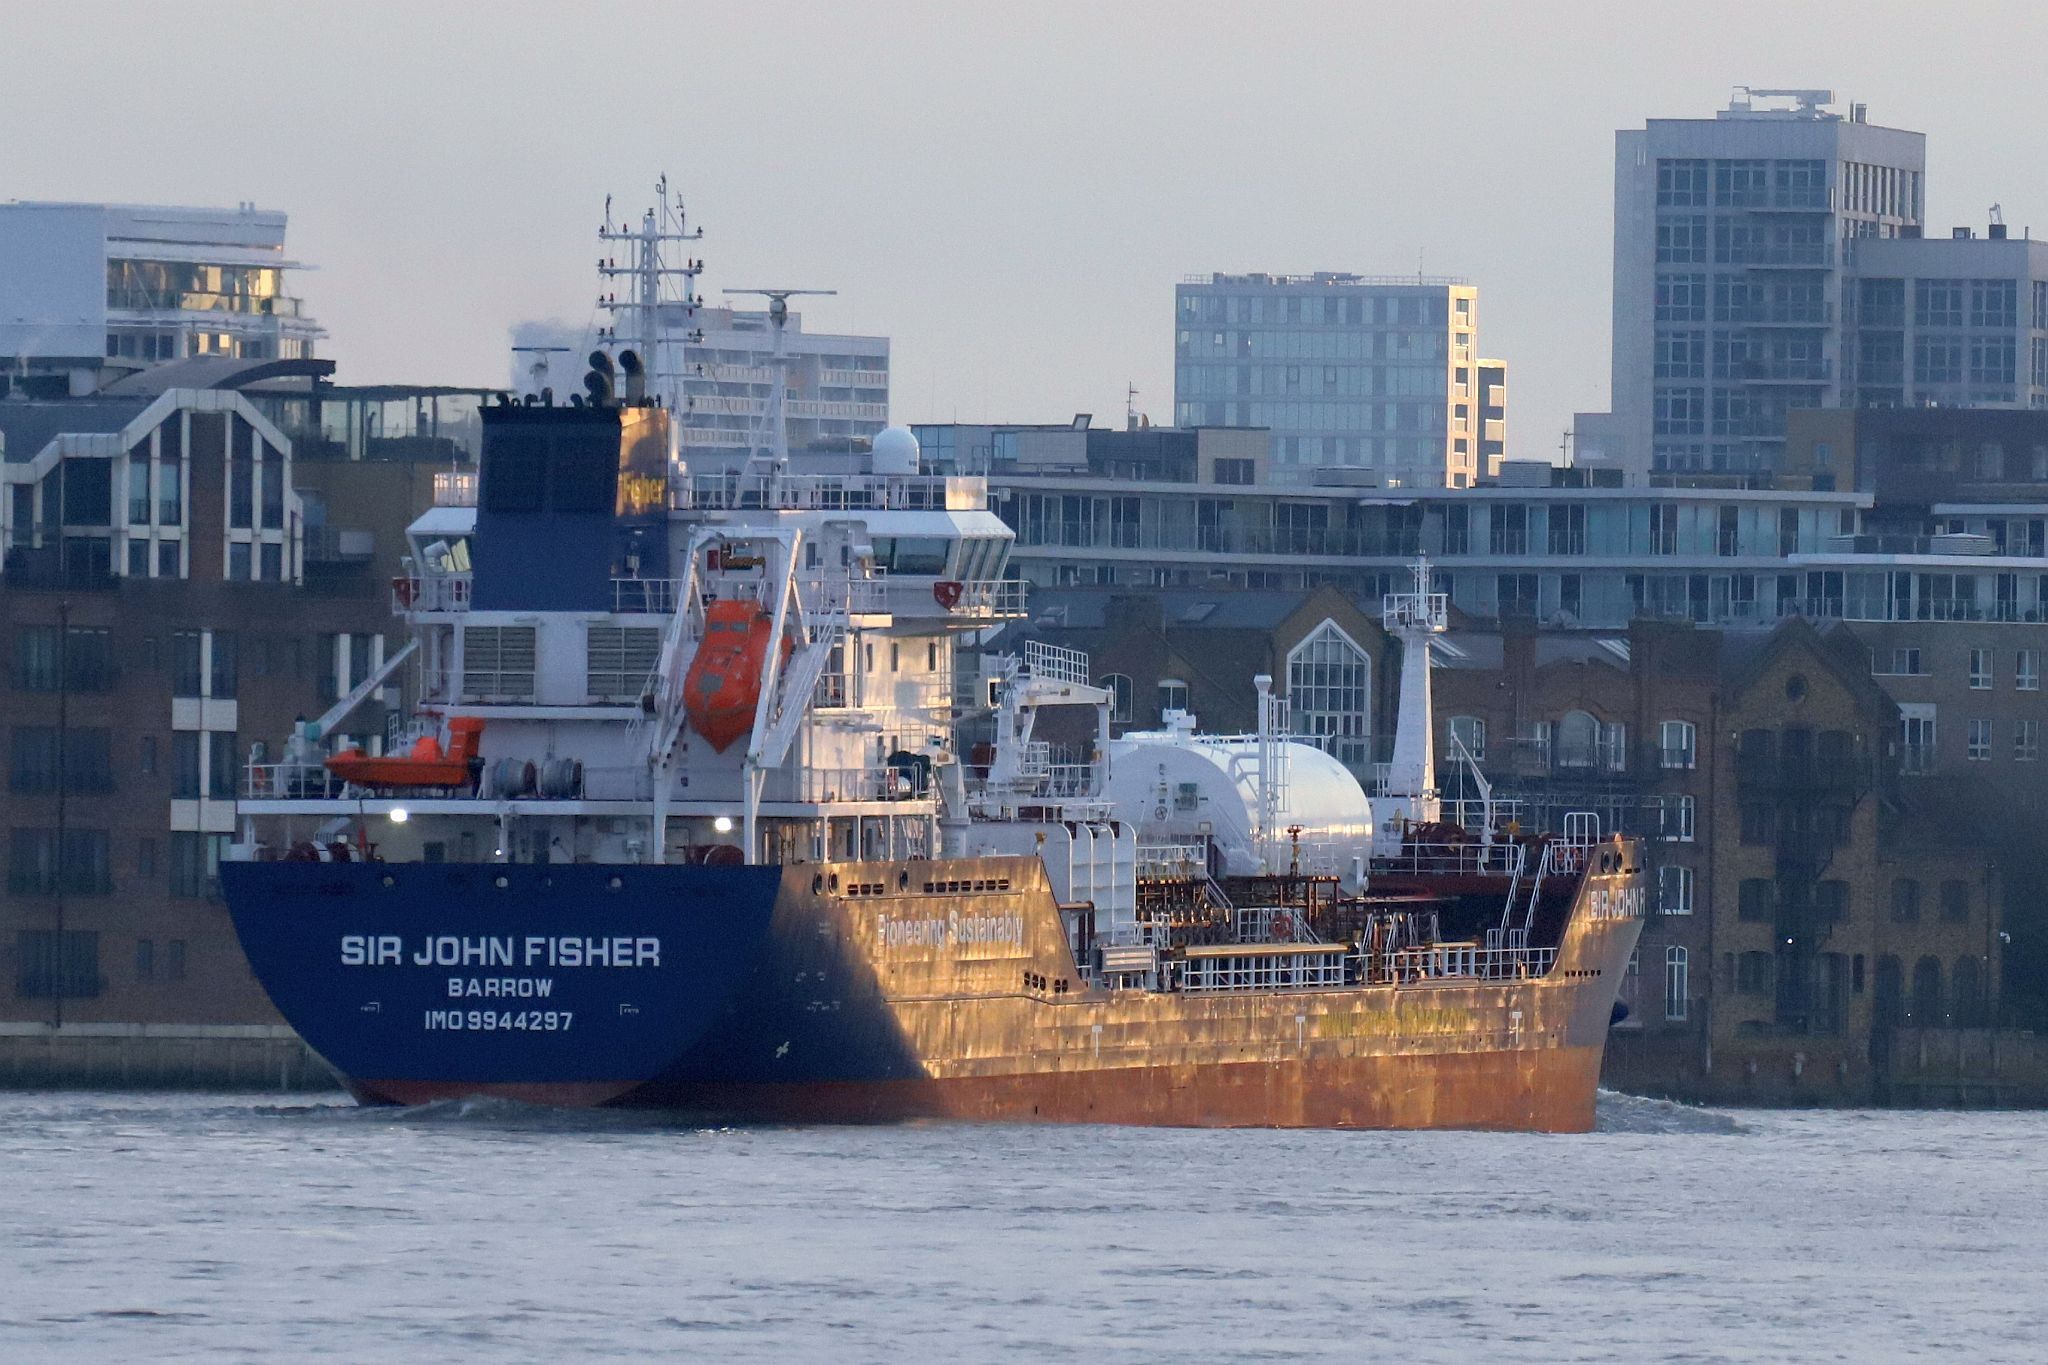 Chemical Tanker “Sir John Fisher”, owned by James Fisher, leaves central London on 29-Mar-2023 and passes downstream on the River Thames.